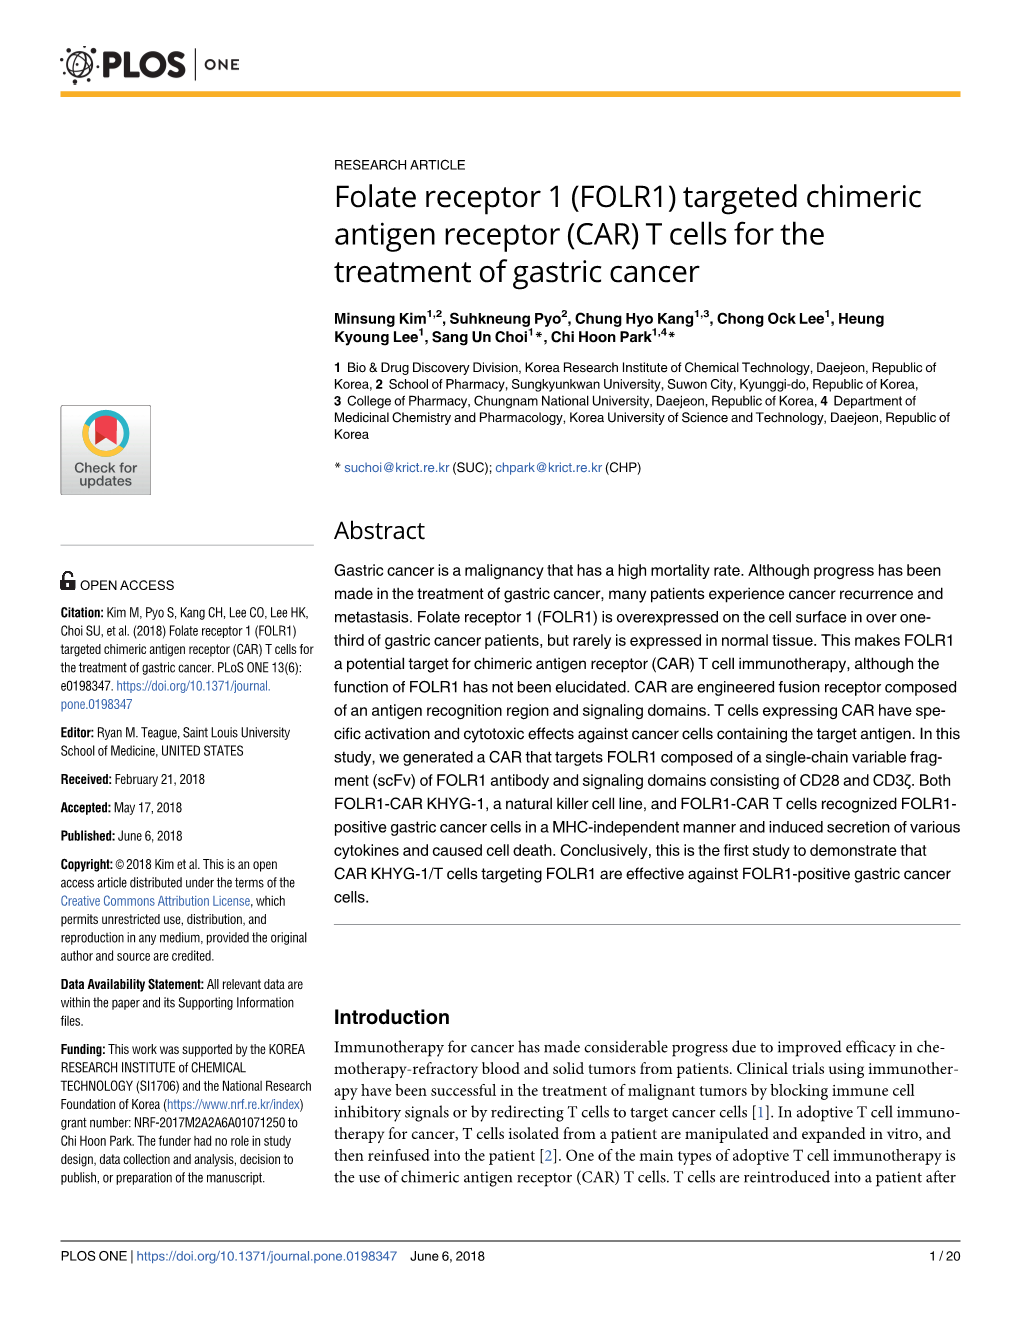 Folate Receptor 1 (FOLR1) Targeted Chimeric Antigen Receptor (CAR) T Cells for the Treatment of Gastric Cancer